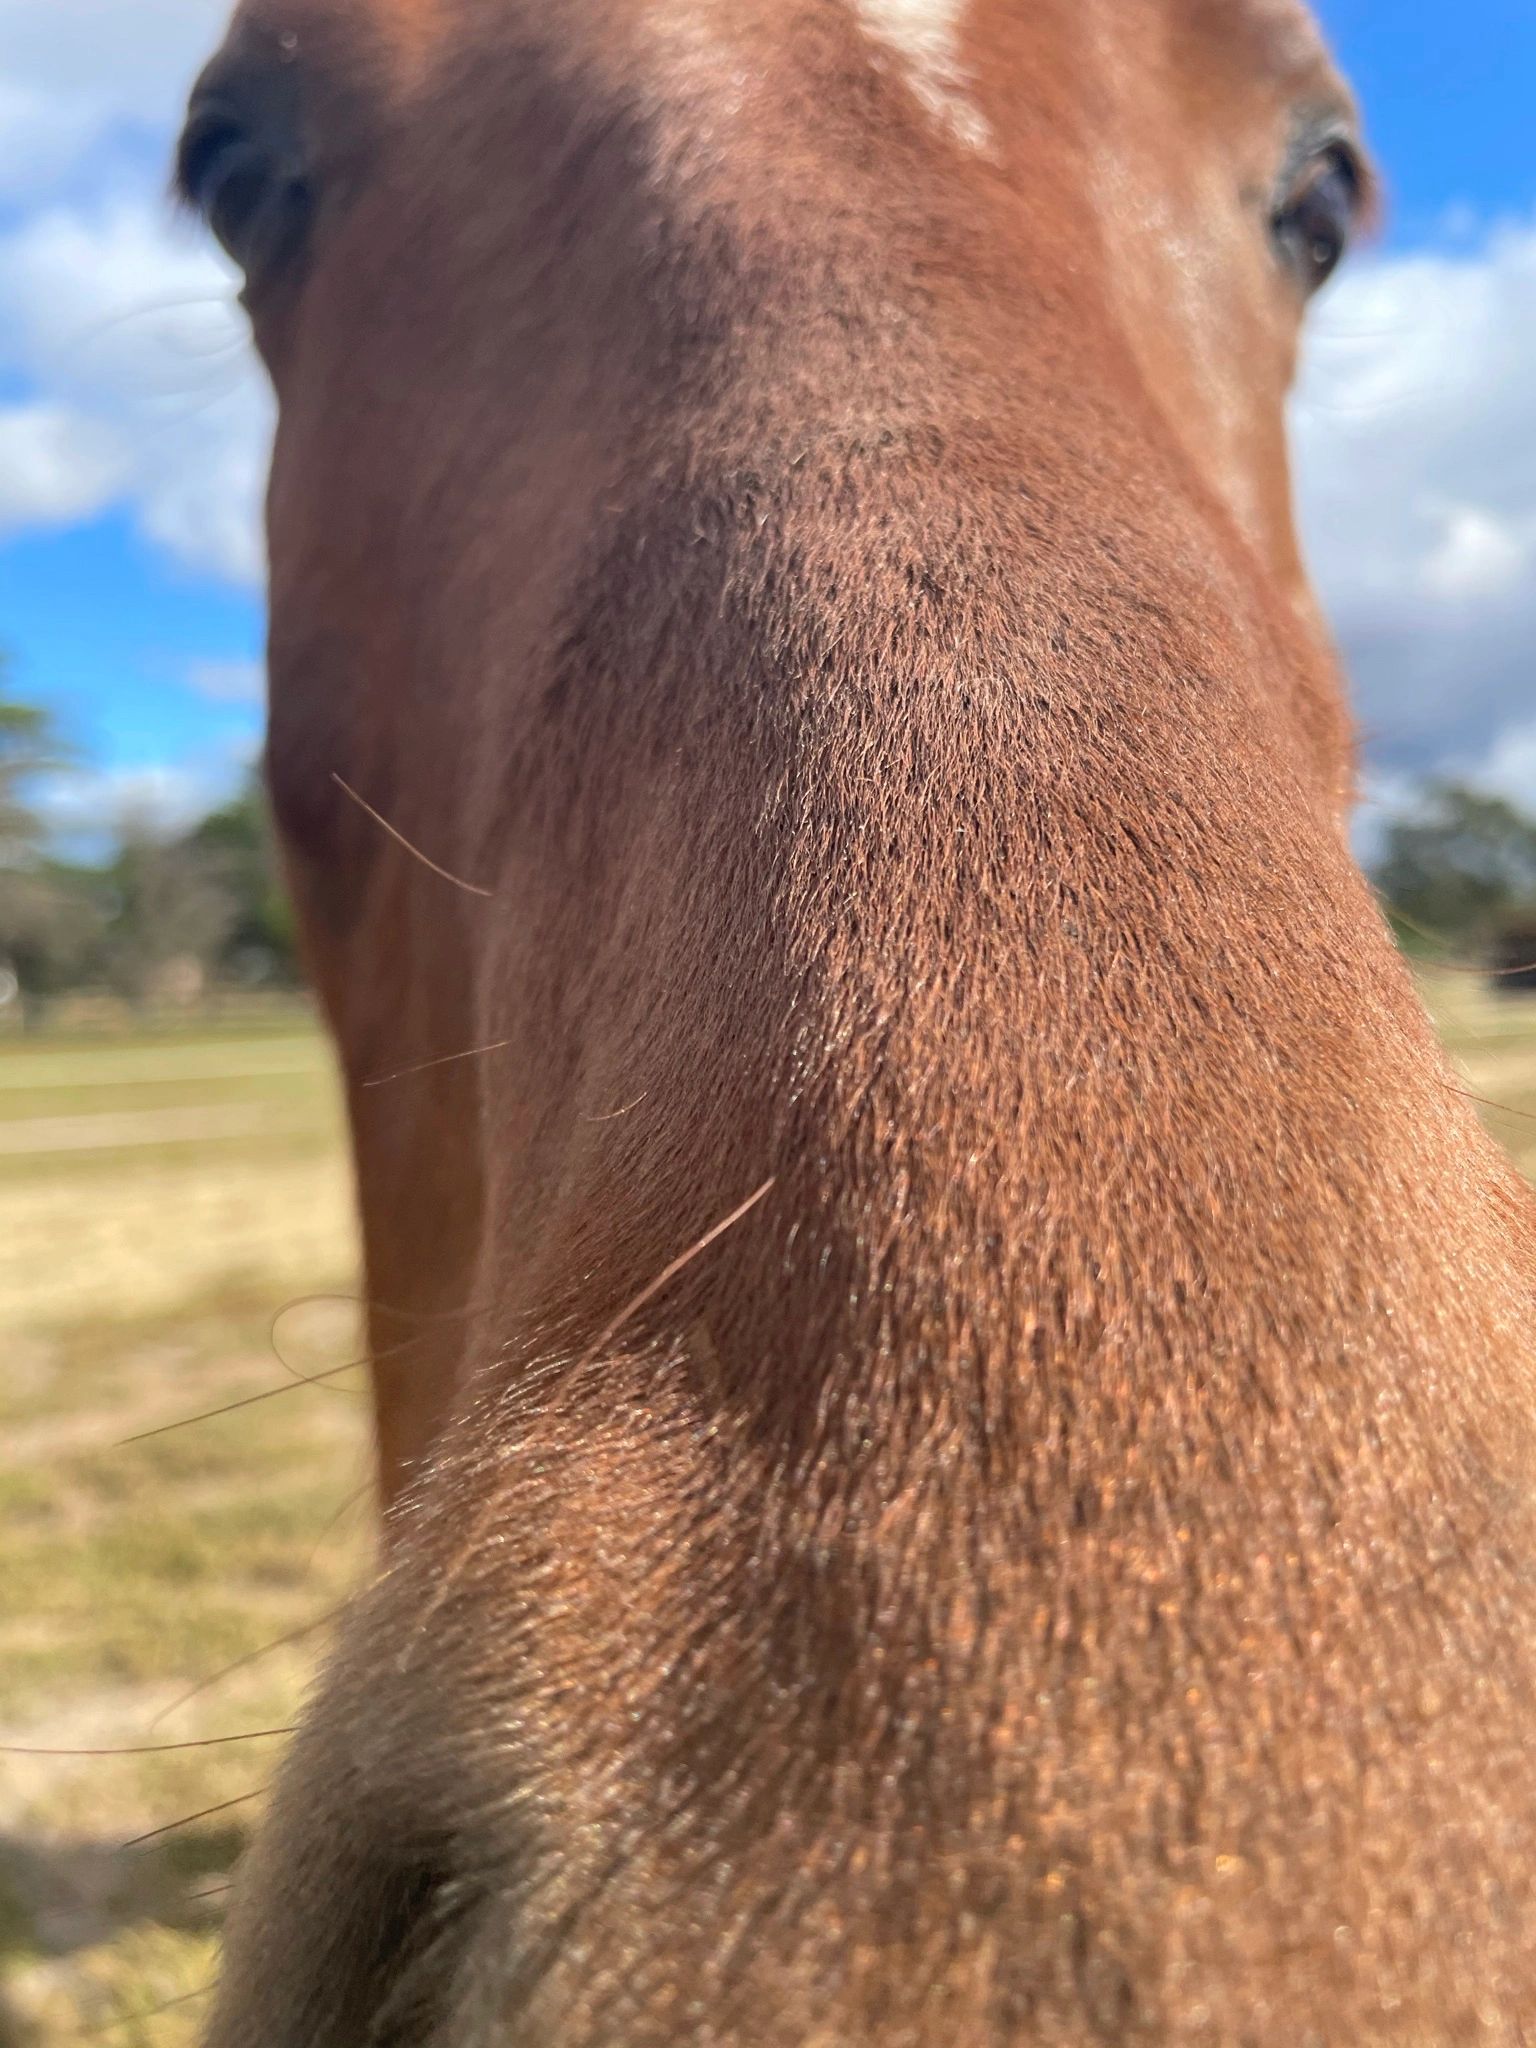 Close-up of a horse's nose.